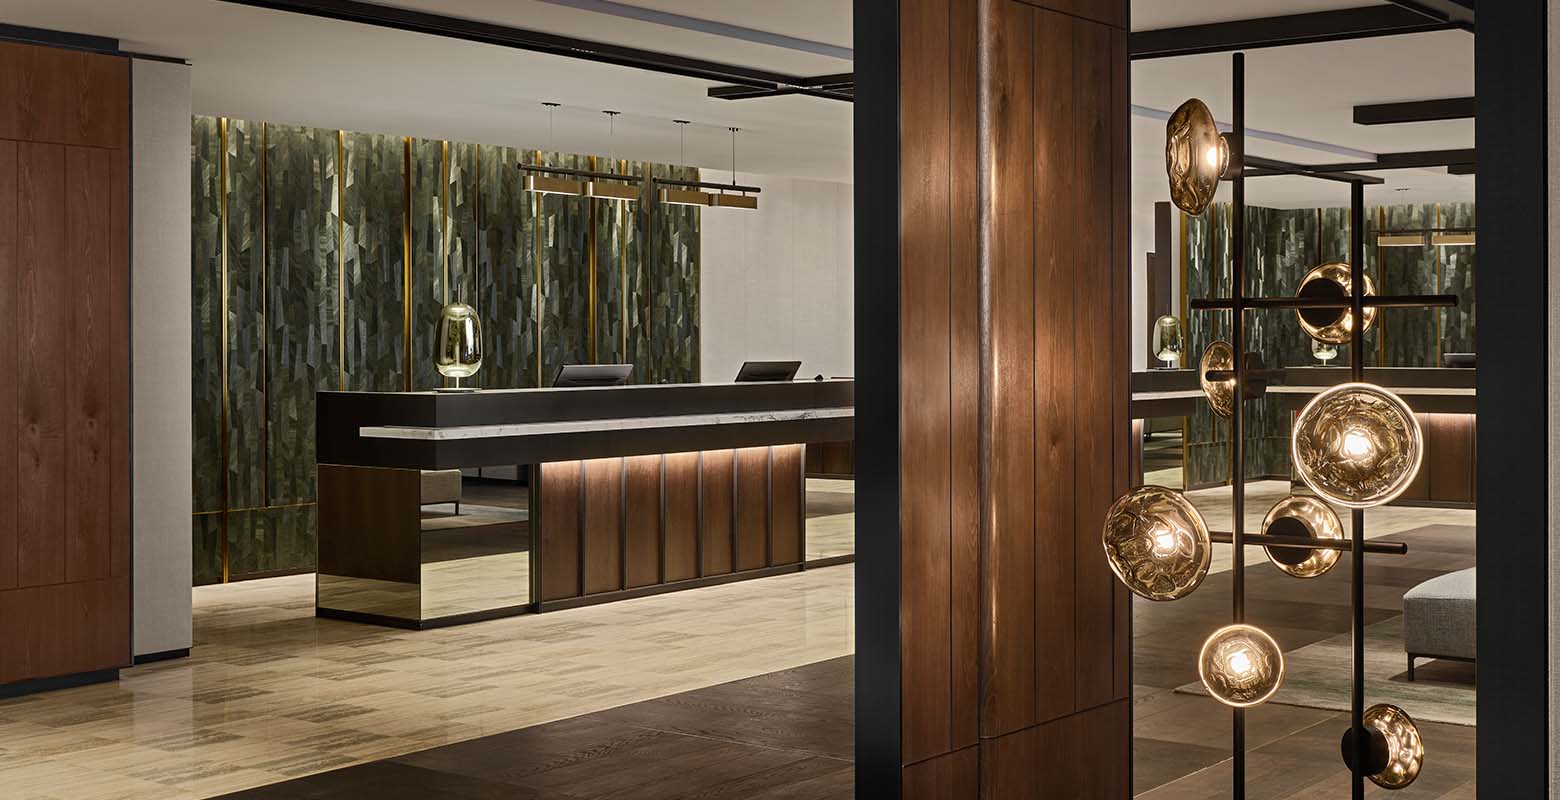 Lobby with wood panelling at Hilton Singapore Orchard Hotel refurbished by ISG